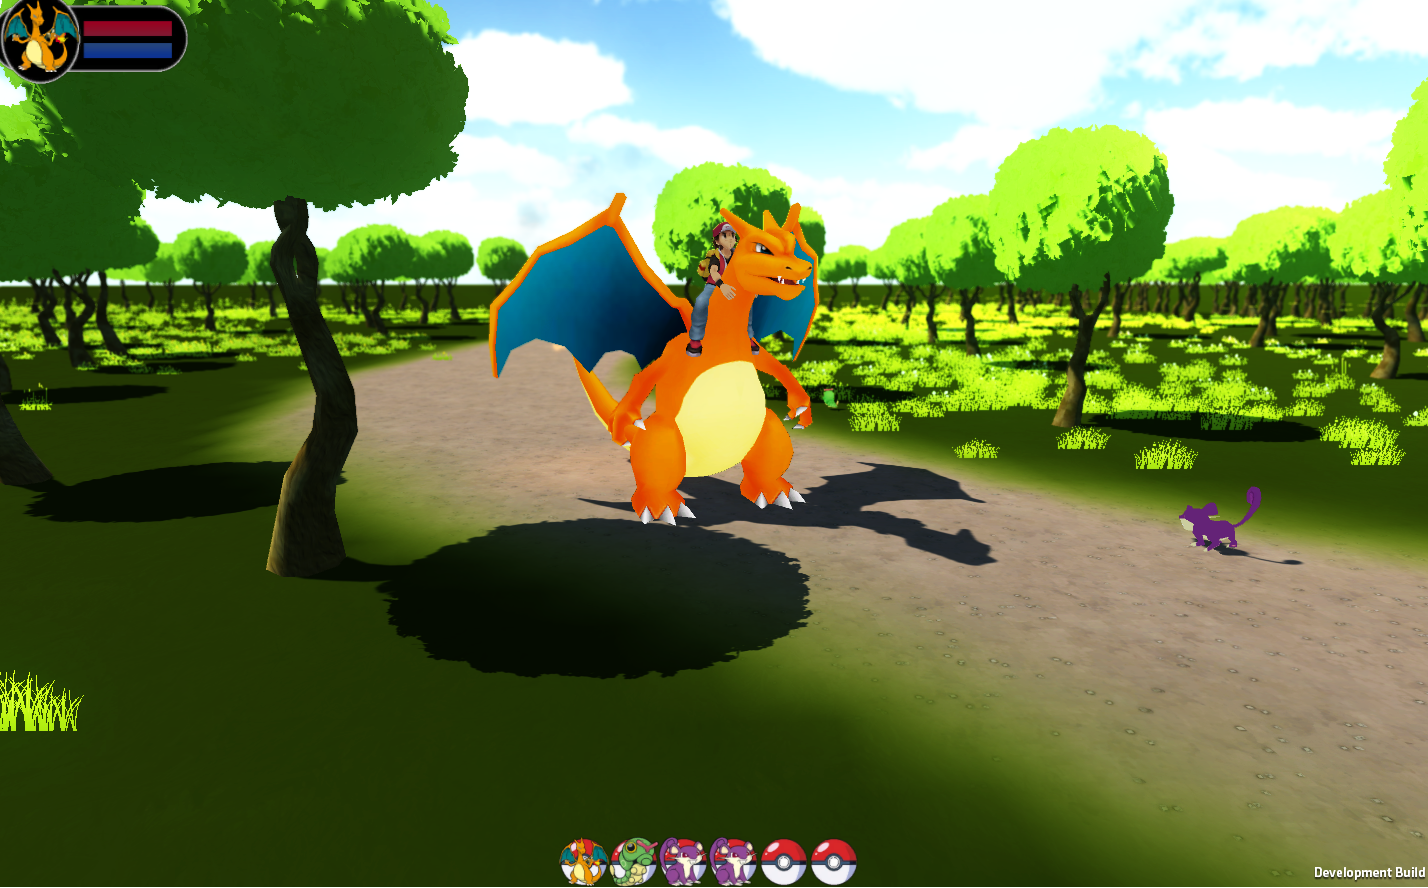 KANTO LOOKS GREAT IN 3D MMO! (Pokémon MMO 3D) video - IndieDB